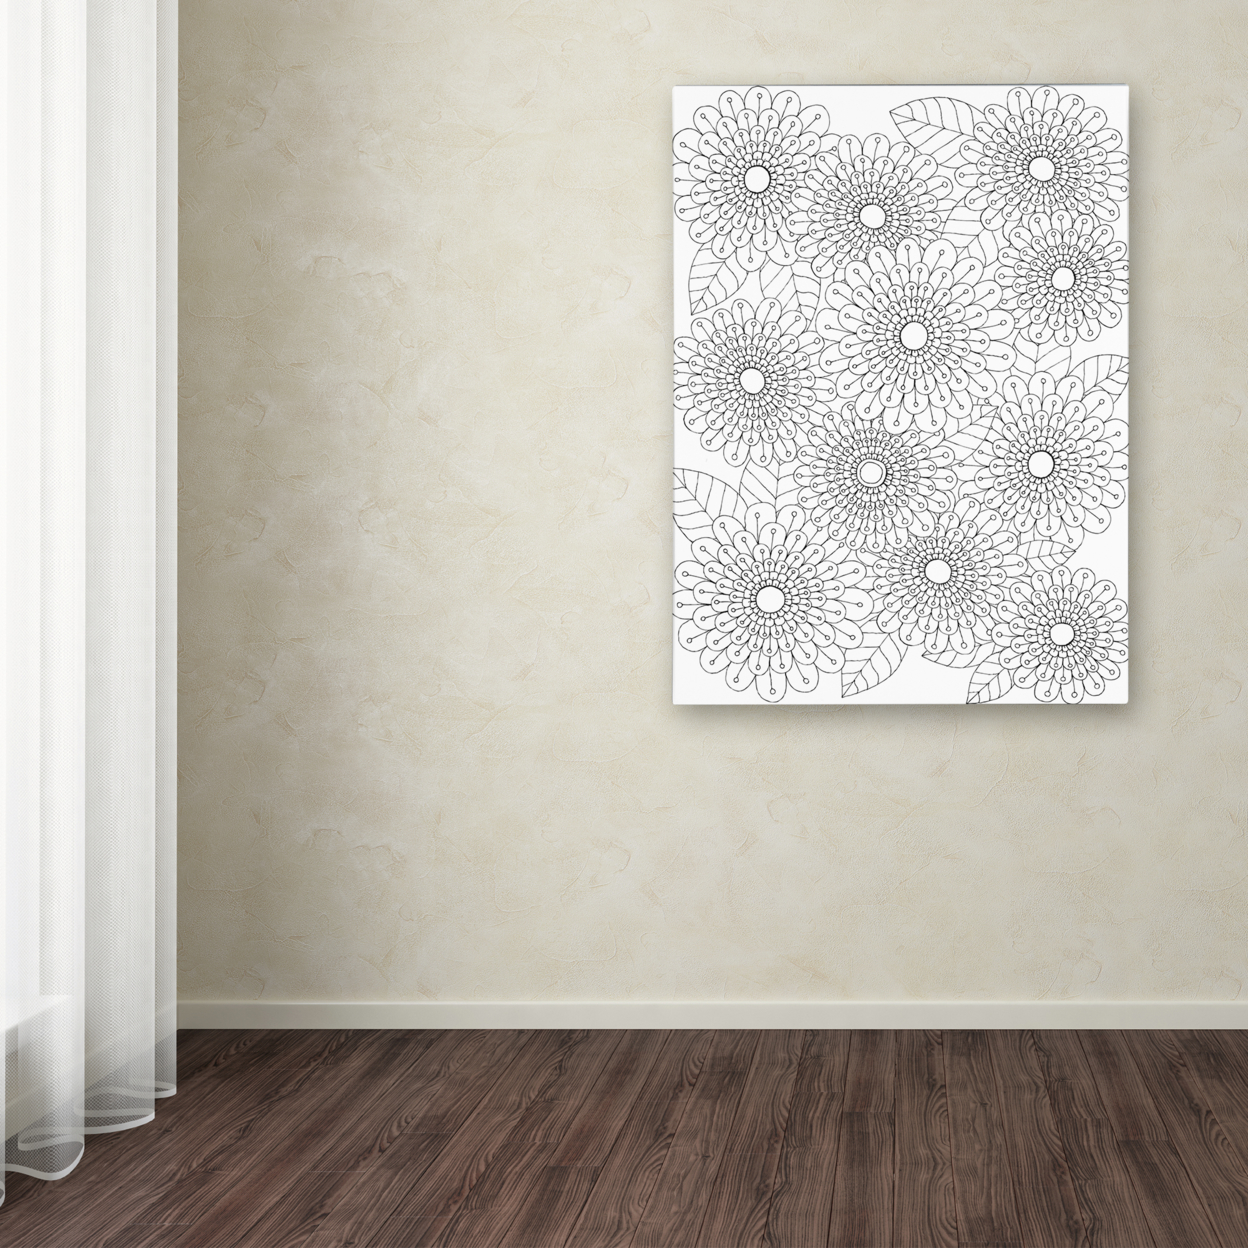 Hello Angel 'Big Beautiful Blossoms 19' Canvas Wall Art 35 X 47 Inches